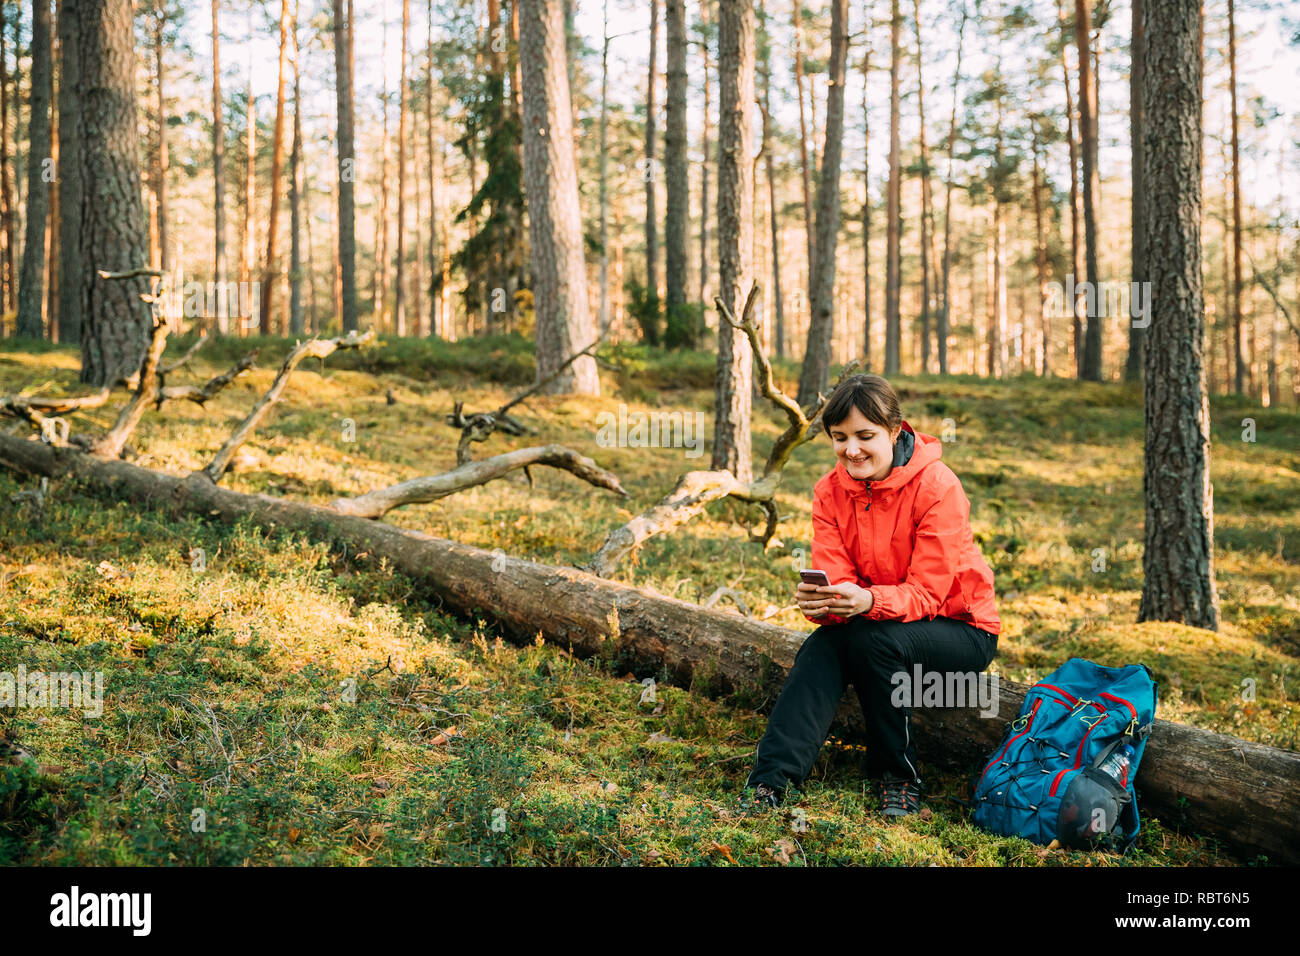 Young Adult Beautiful Caucasian Girl Woman Dressed In Red Jacket Resting Sitting On Fallen Tree And Surfing The Internet On Smartphone In Autumn Green Stock Photo